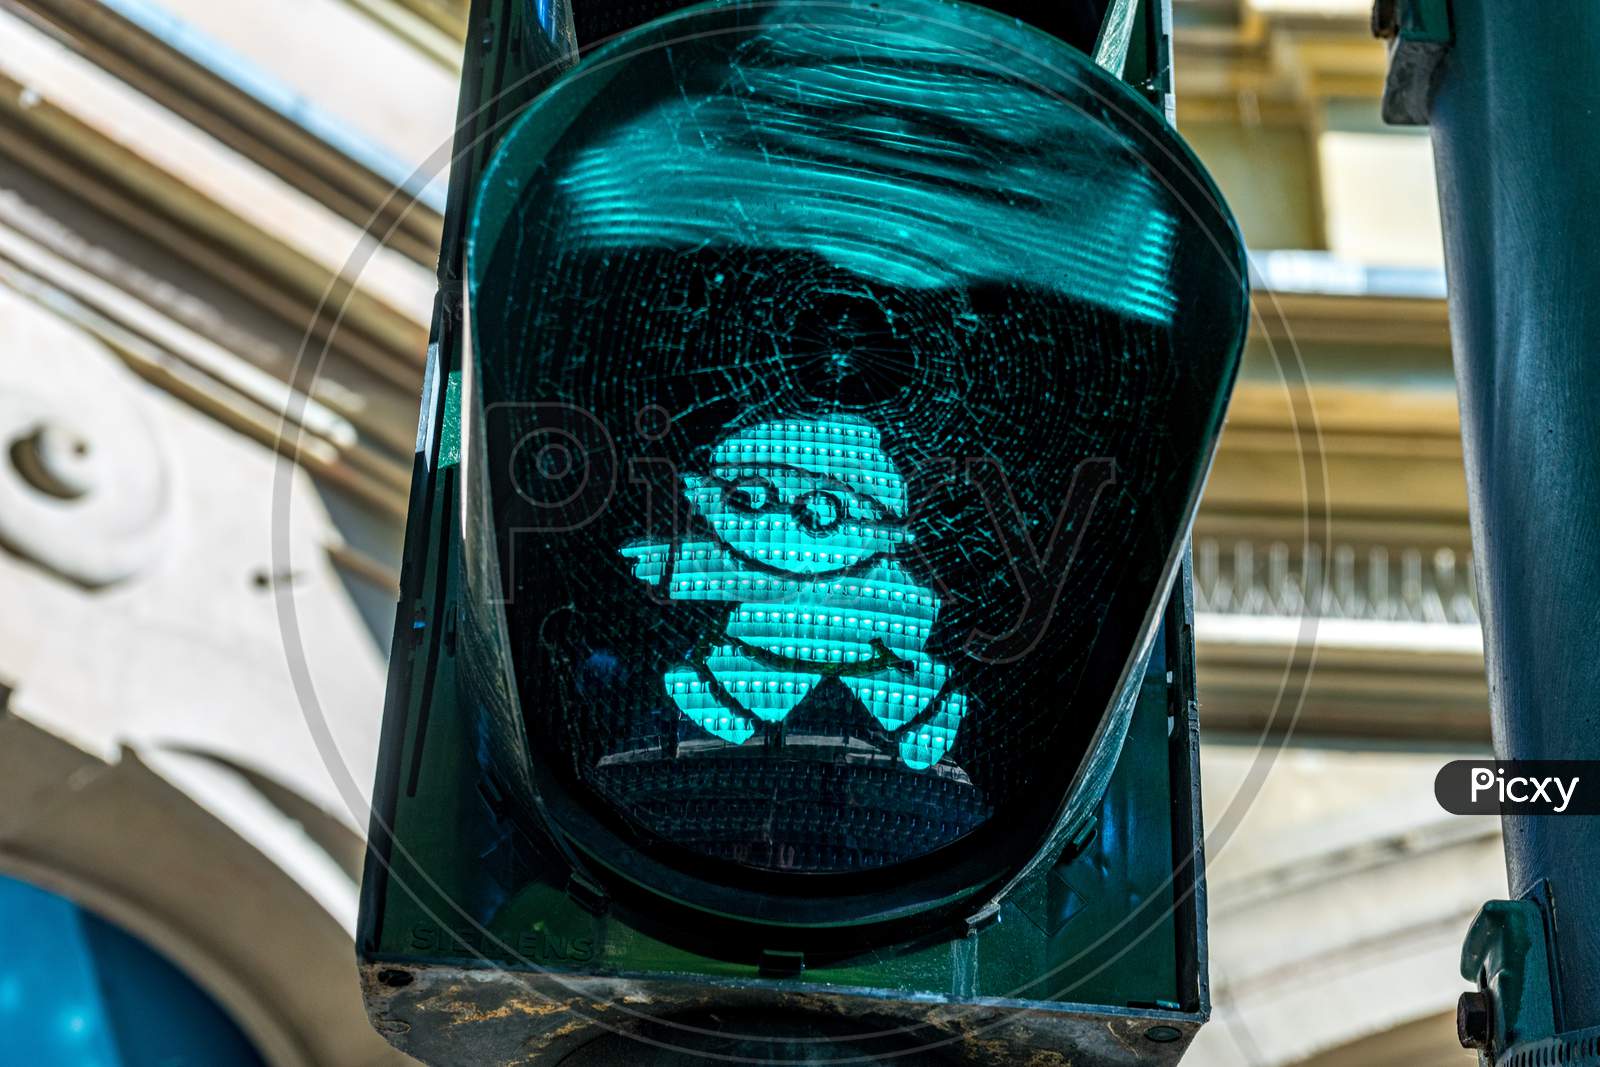 Germany, Heritage Site Mainz, A Close Up Of A Green Traffic Light